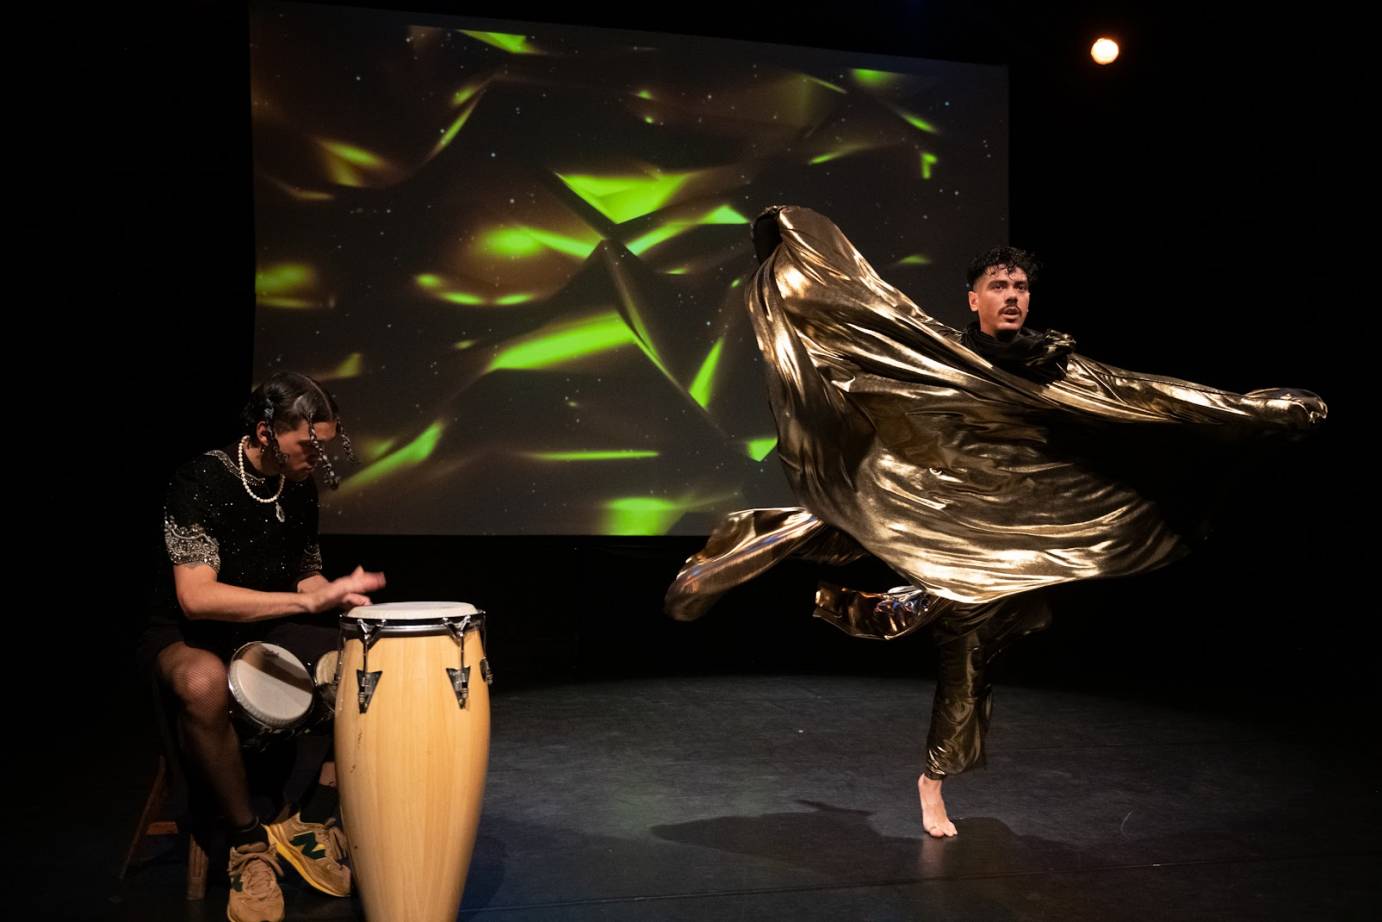 A drummer dressed in black shirt and shorts and textured stockings plays the conga while a mustachioed man dances in swirling gold fabric. Projected behind them is an undulating gold backdrop pierced by bright green glints..